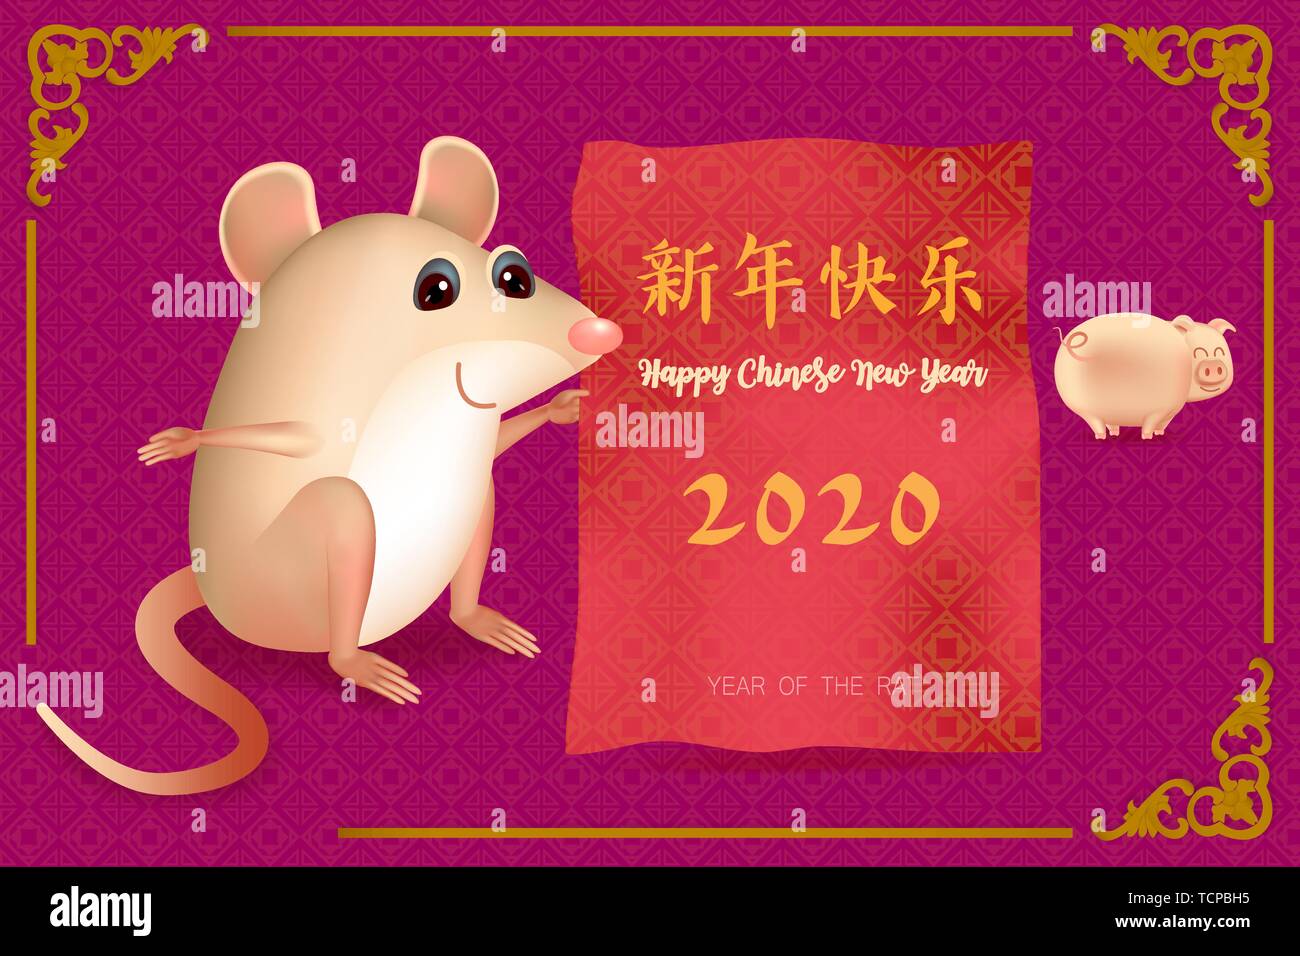 Chinese New Year 2020 Greeting Card Wth Cute Rat Zodiac Sign